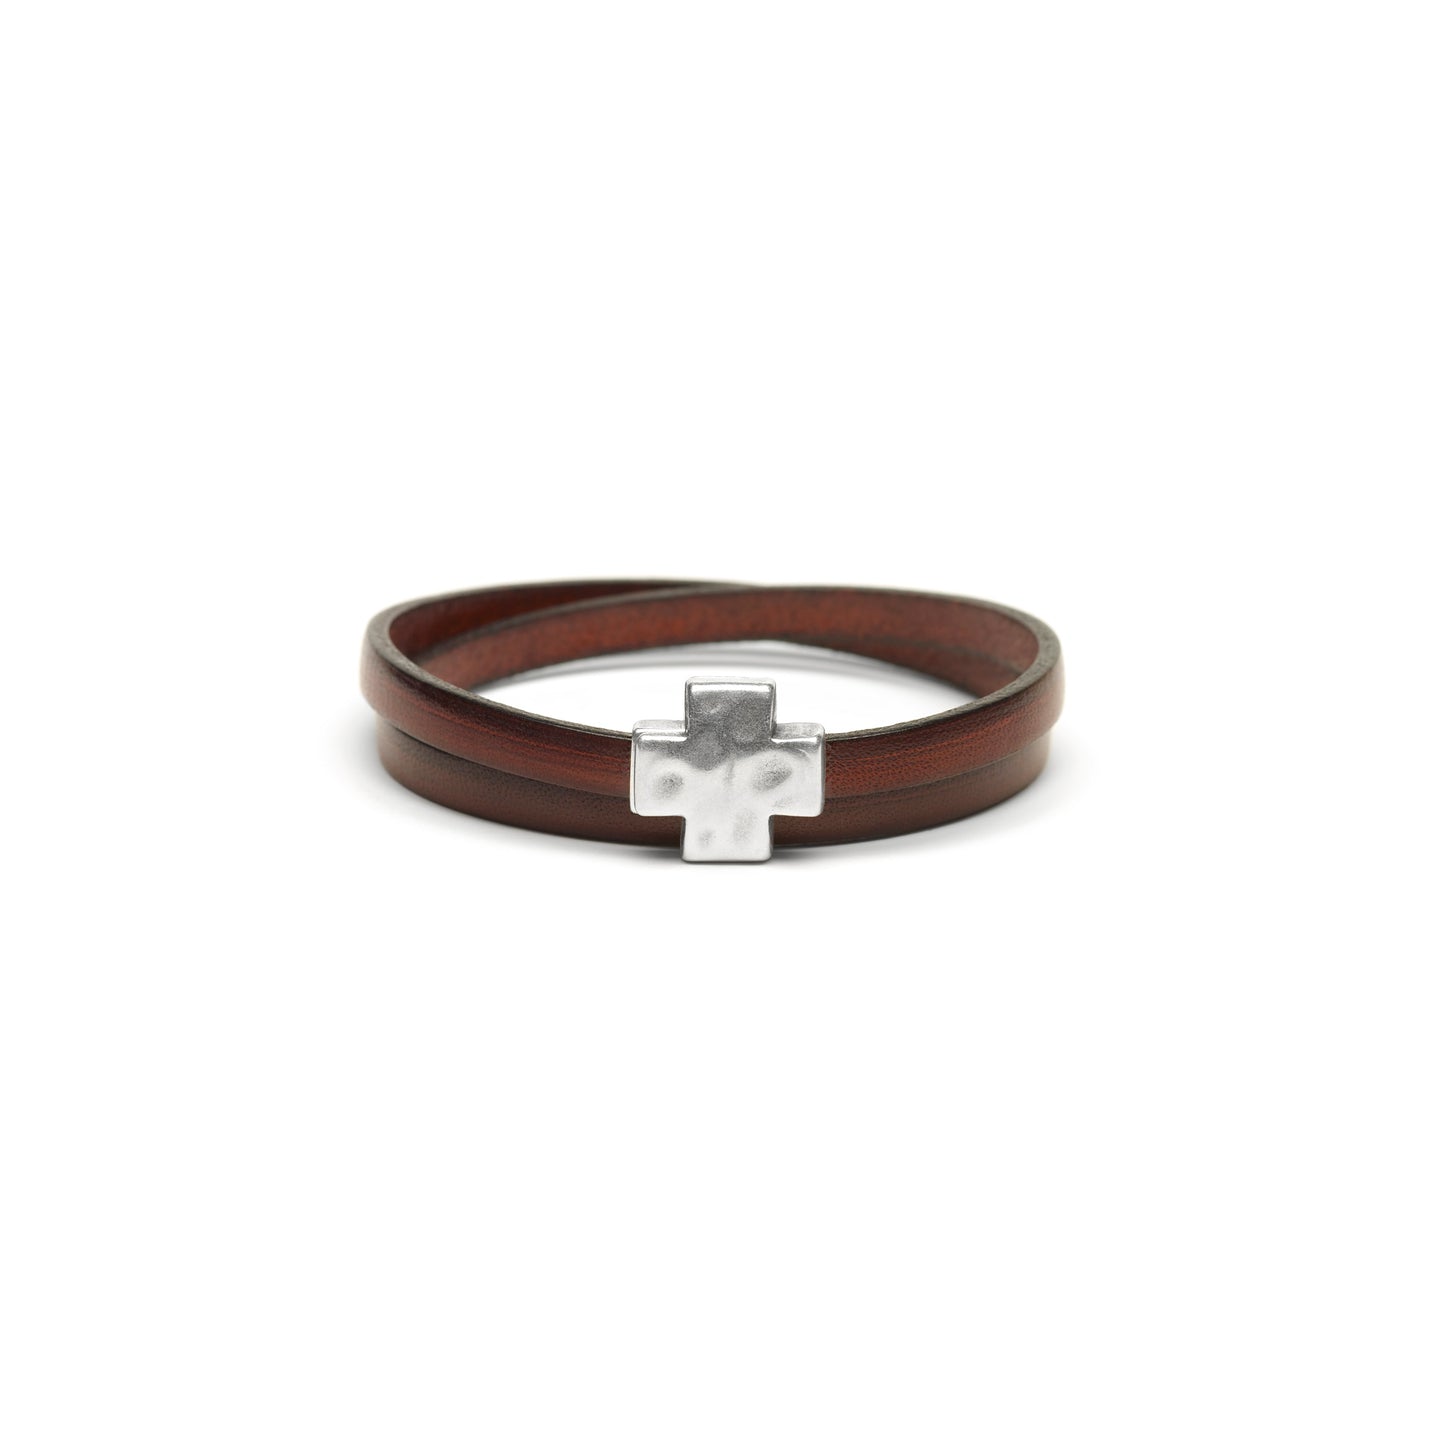 "Wrap it Up Bracelet" with Silver Cross - Double Length - Chocolate